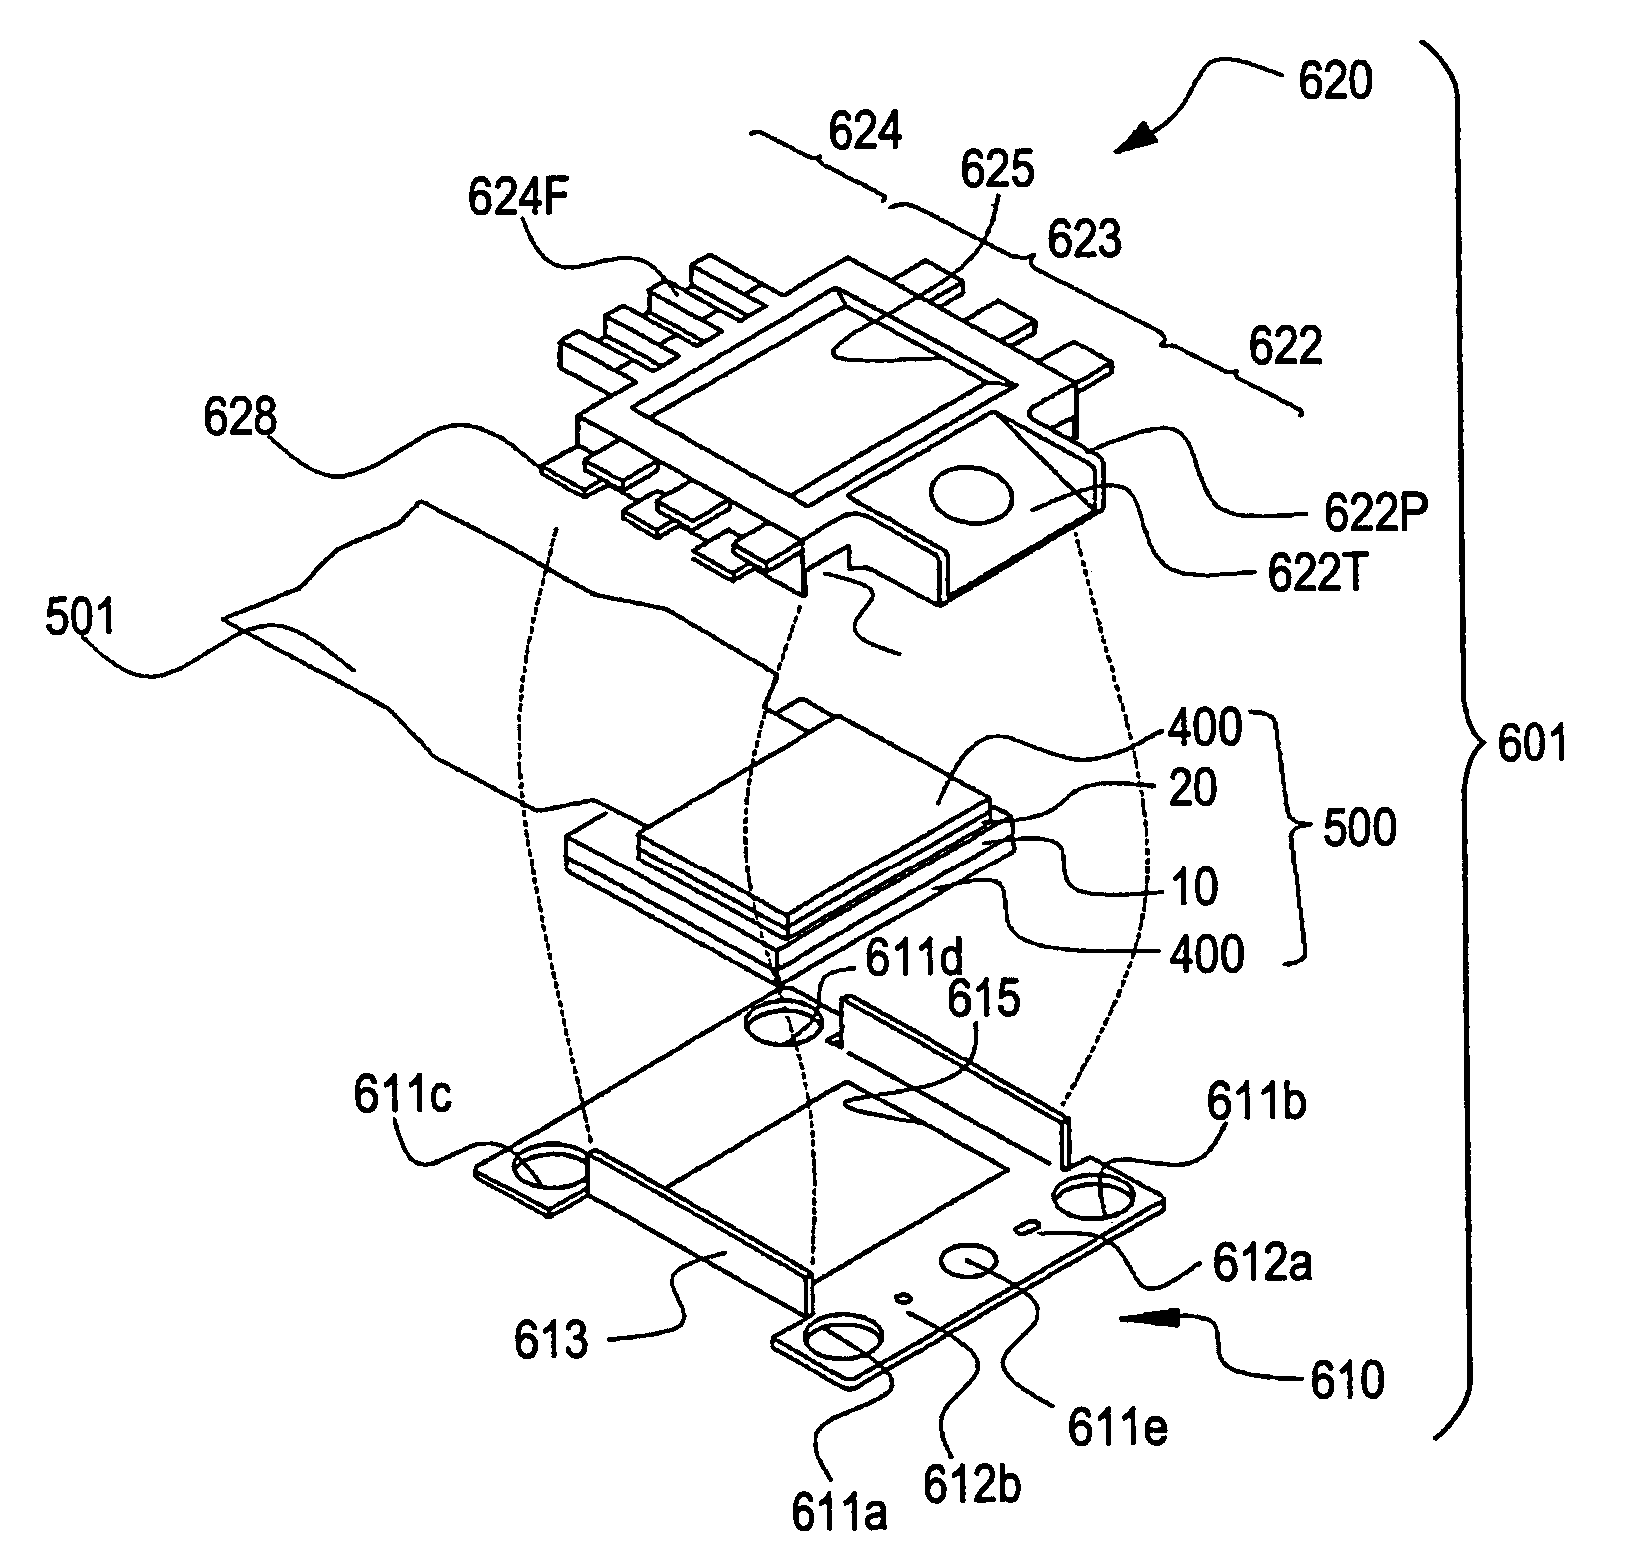 Mounting case for electro-optical device, electro-optical device and electronic apparatus